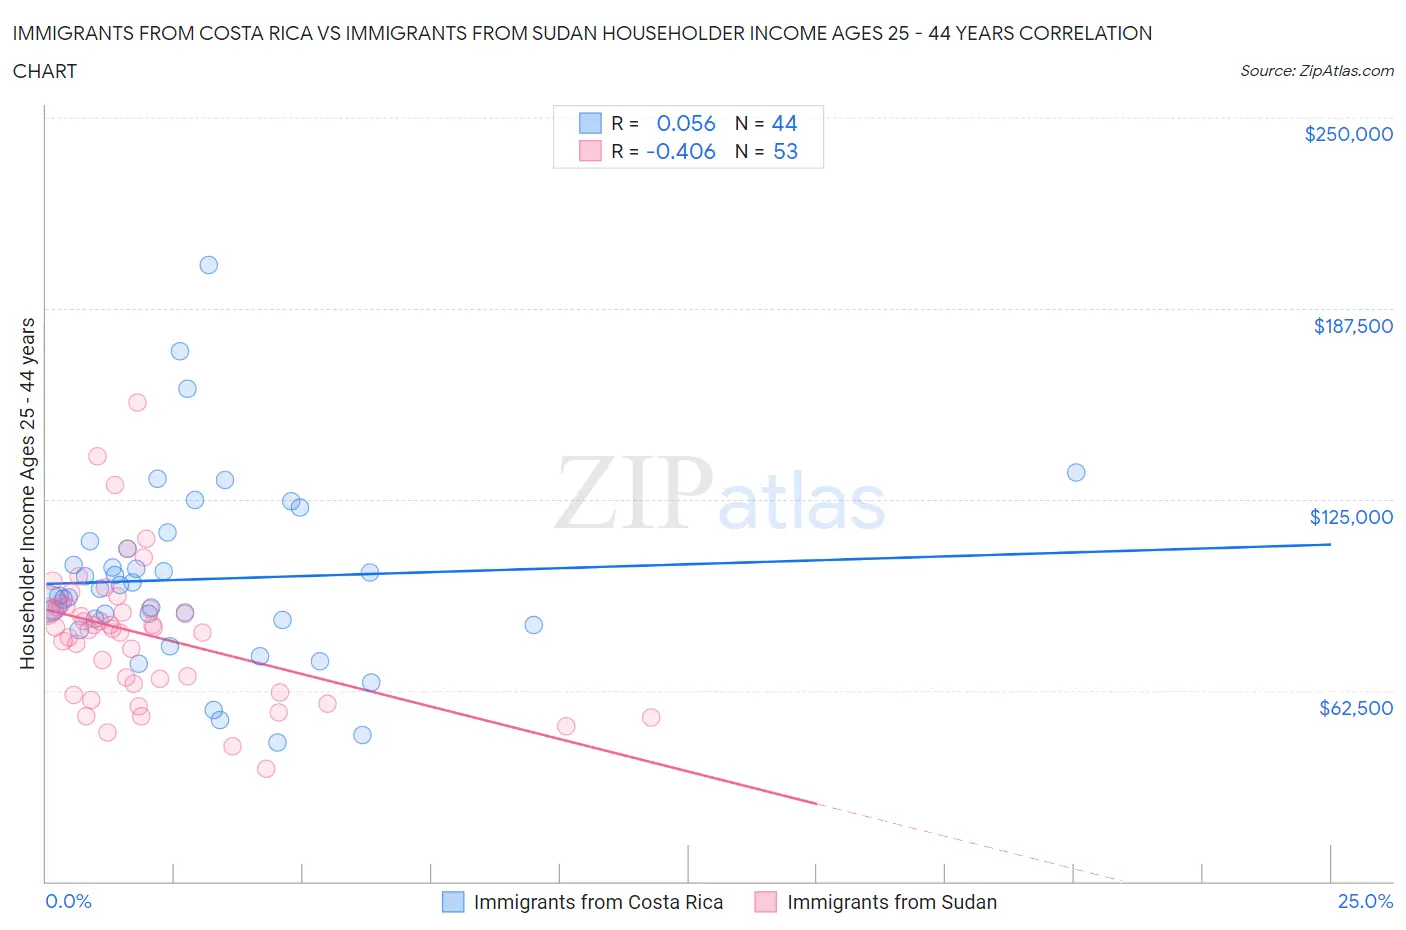 Immigrants from Costa Rica vs Immigrants from Sudan Householder Income Ages 25 - 44 years